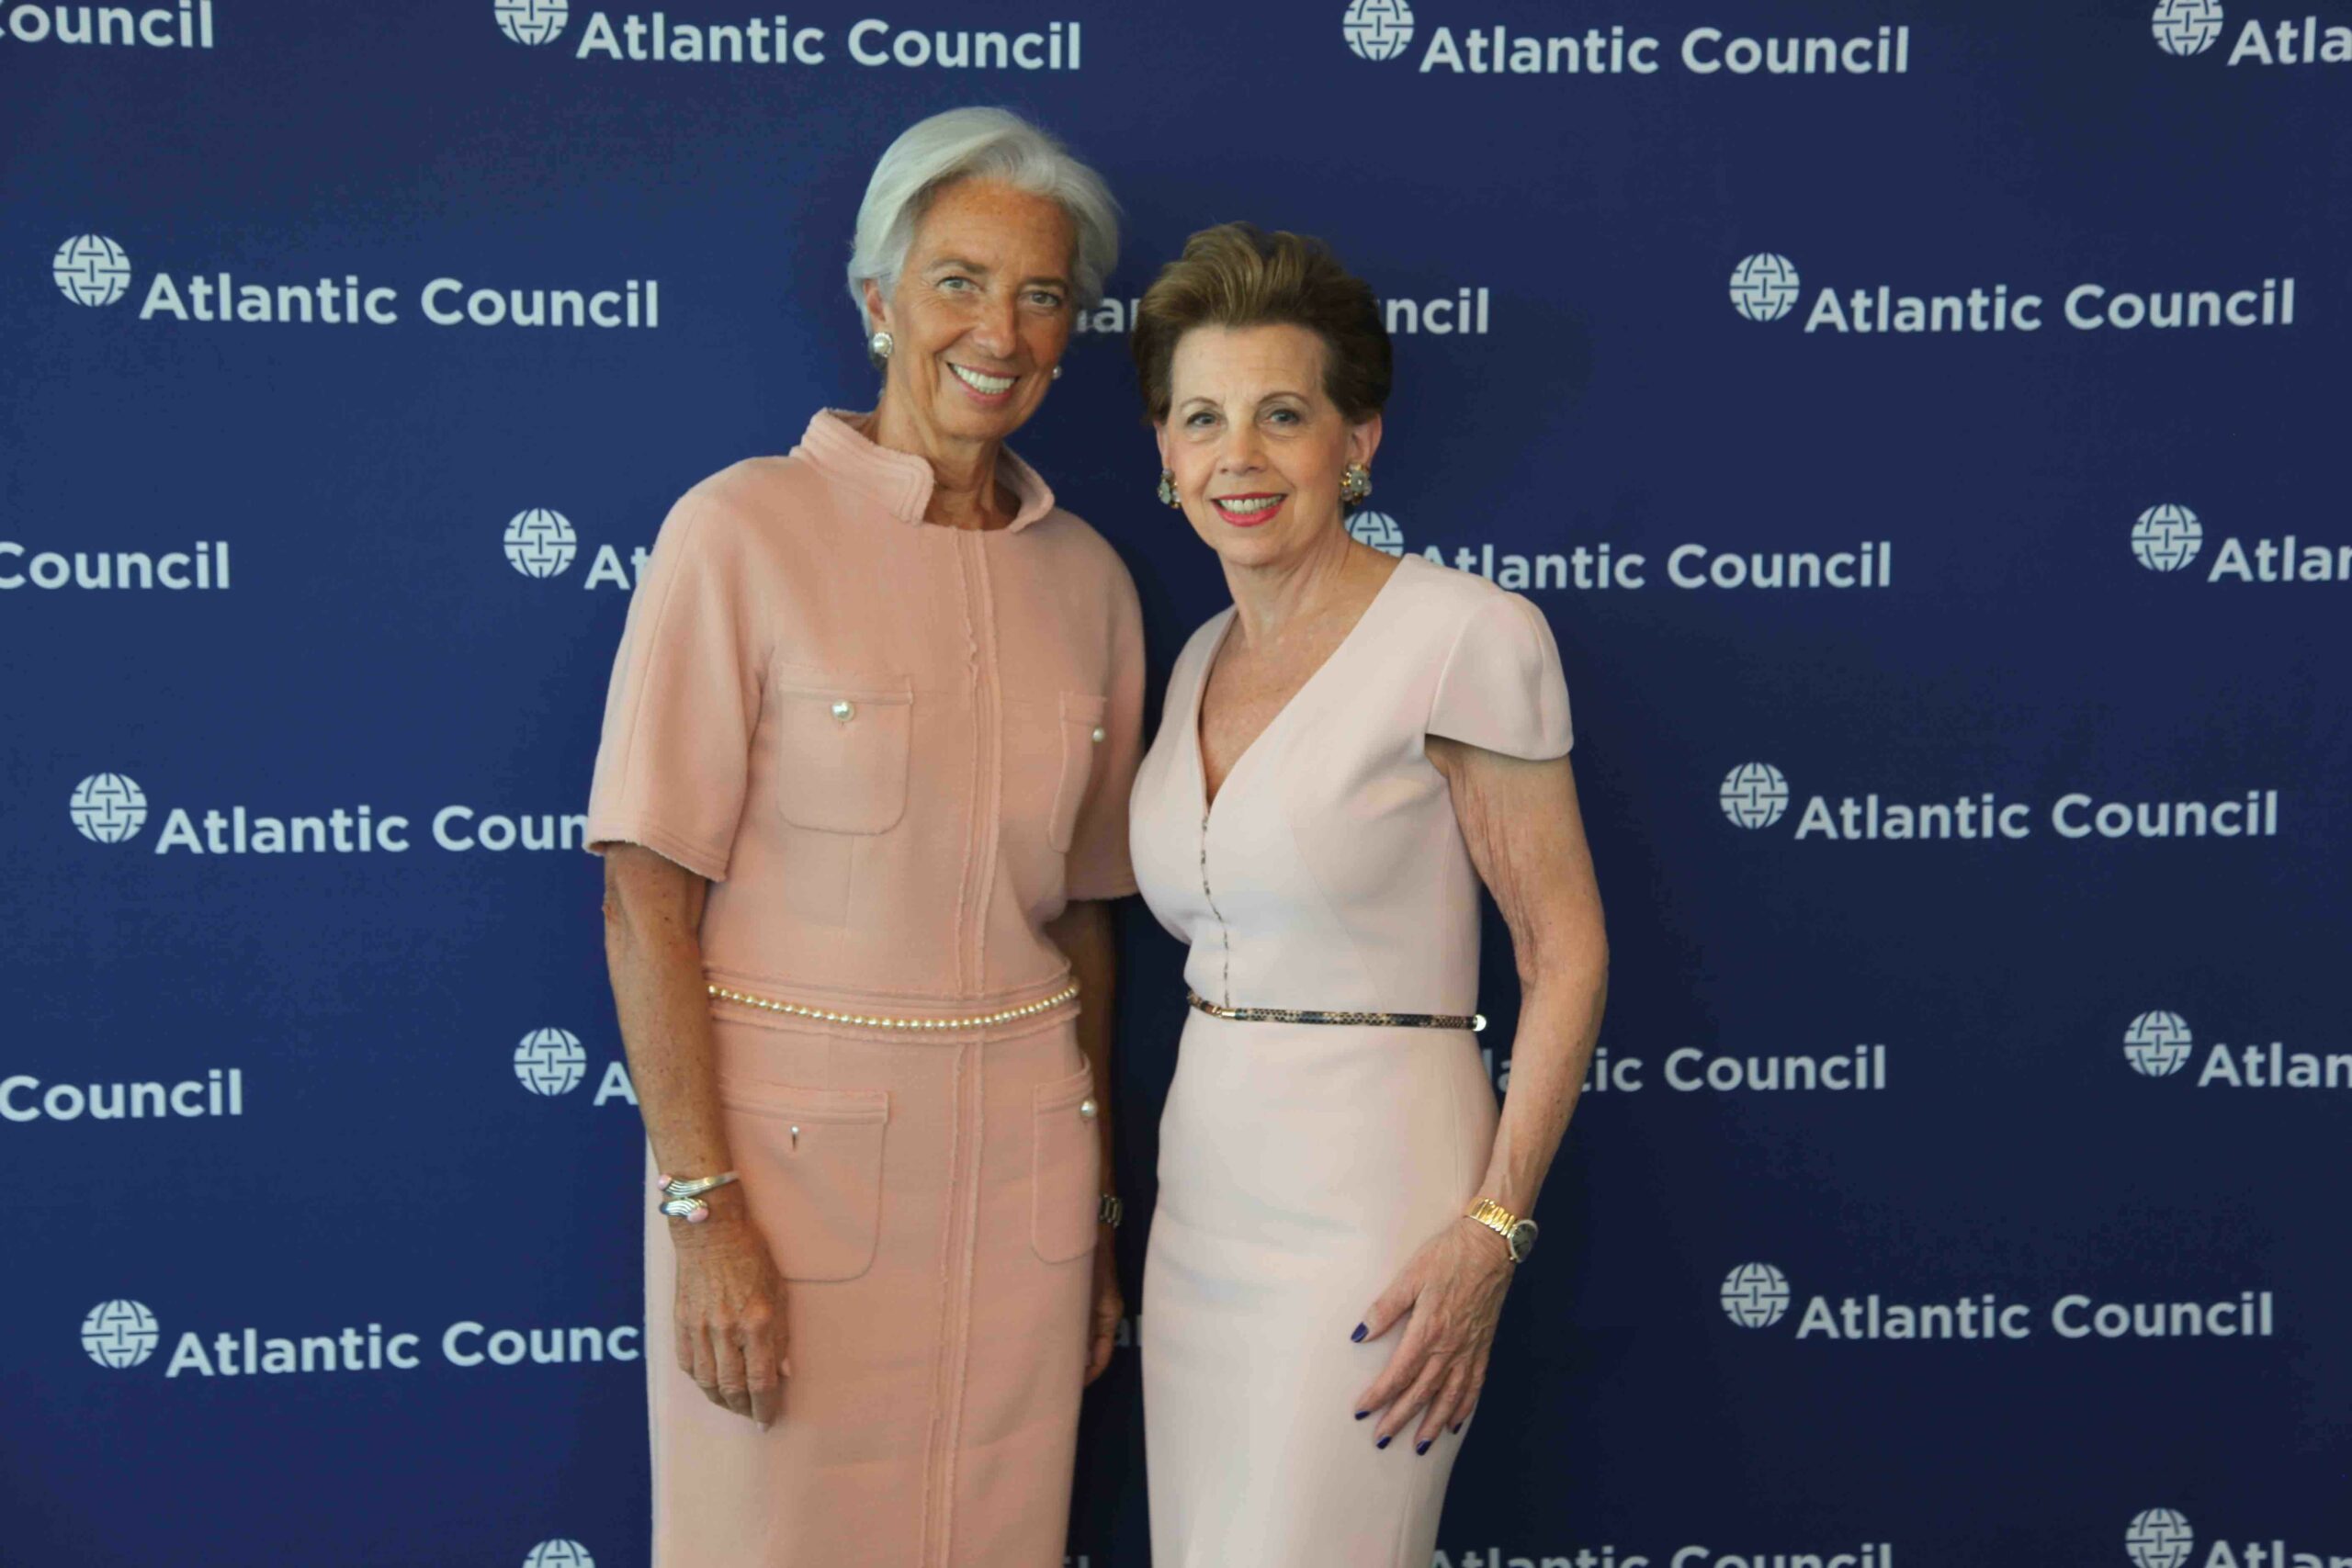 Two powerful women: Adrienne Arsht and Christine Lagarde, Managing Director of the International Monetary Fund 